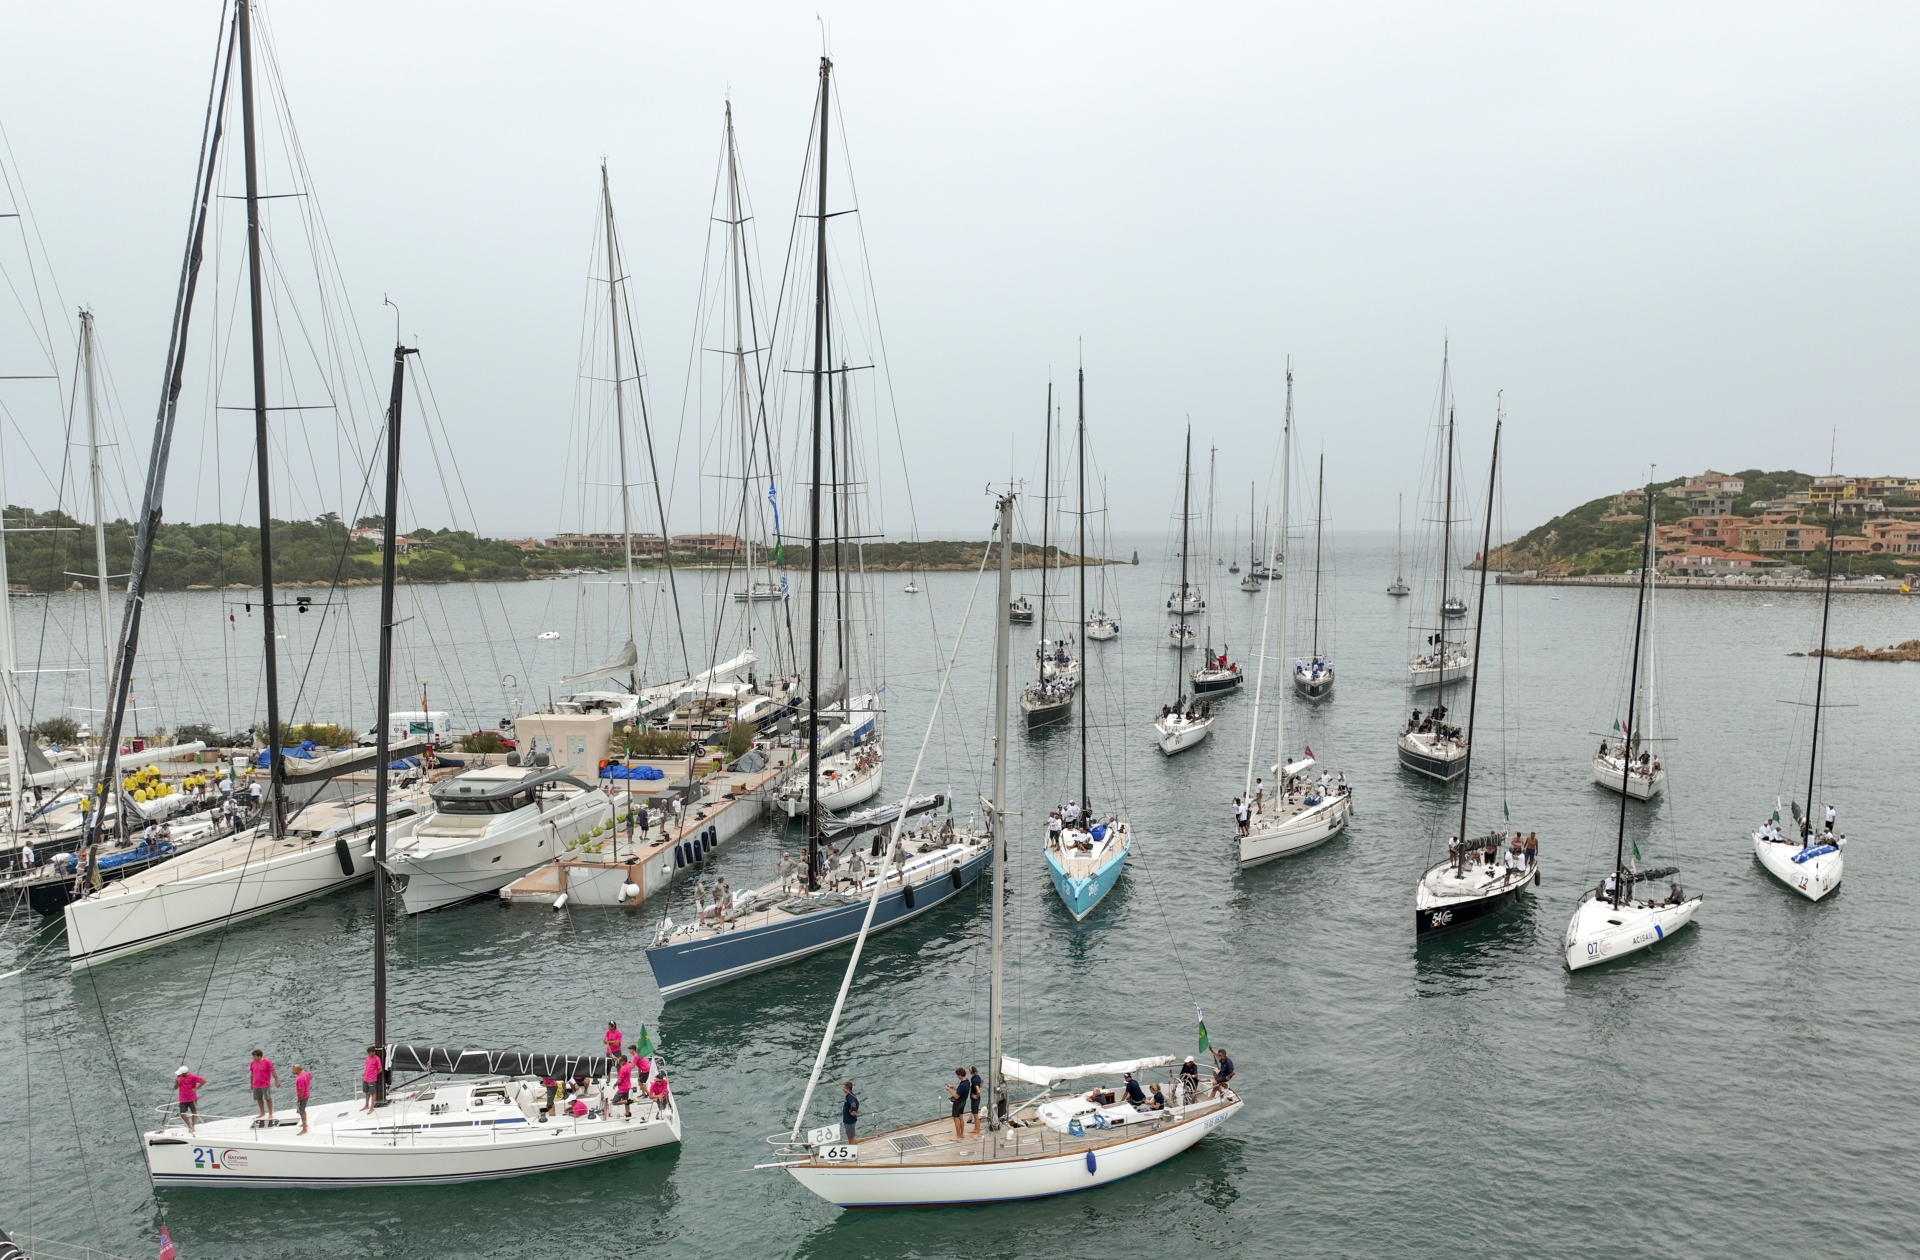 Racing cancelled for today at Rolex Swan Cup - News - Yacht Club Costa Smeralda